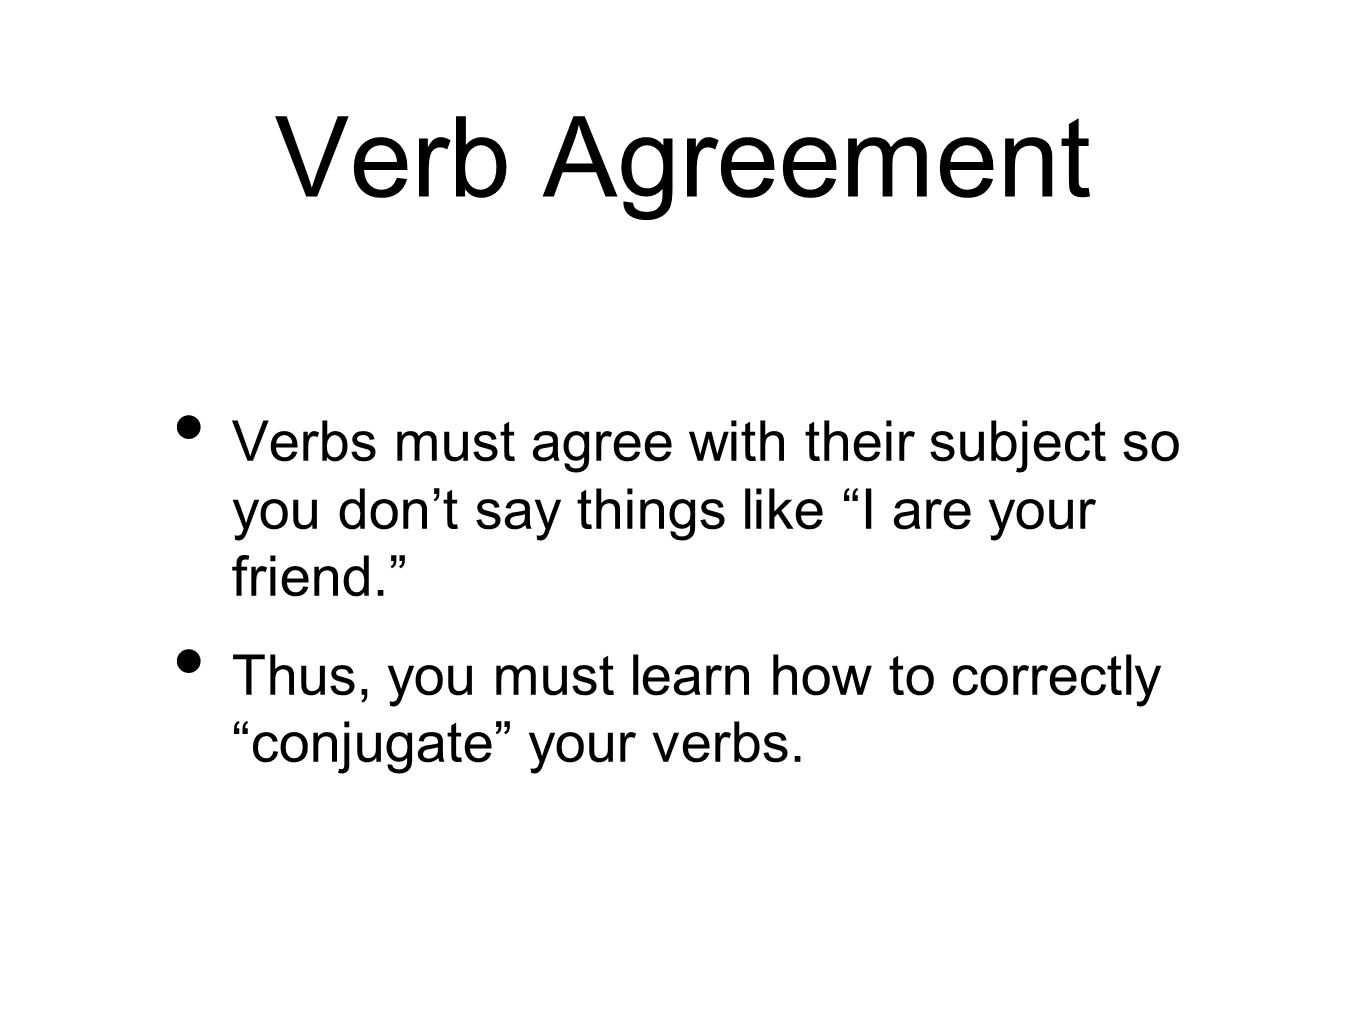 Verb Agreement Verbs must agree with their subject so you don’t say things like I are your friend. Thus, you must learn how to correctly conjugate your verbs.